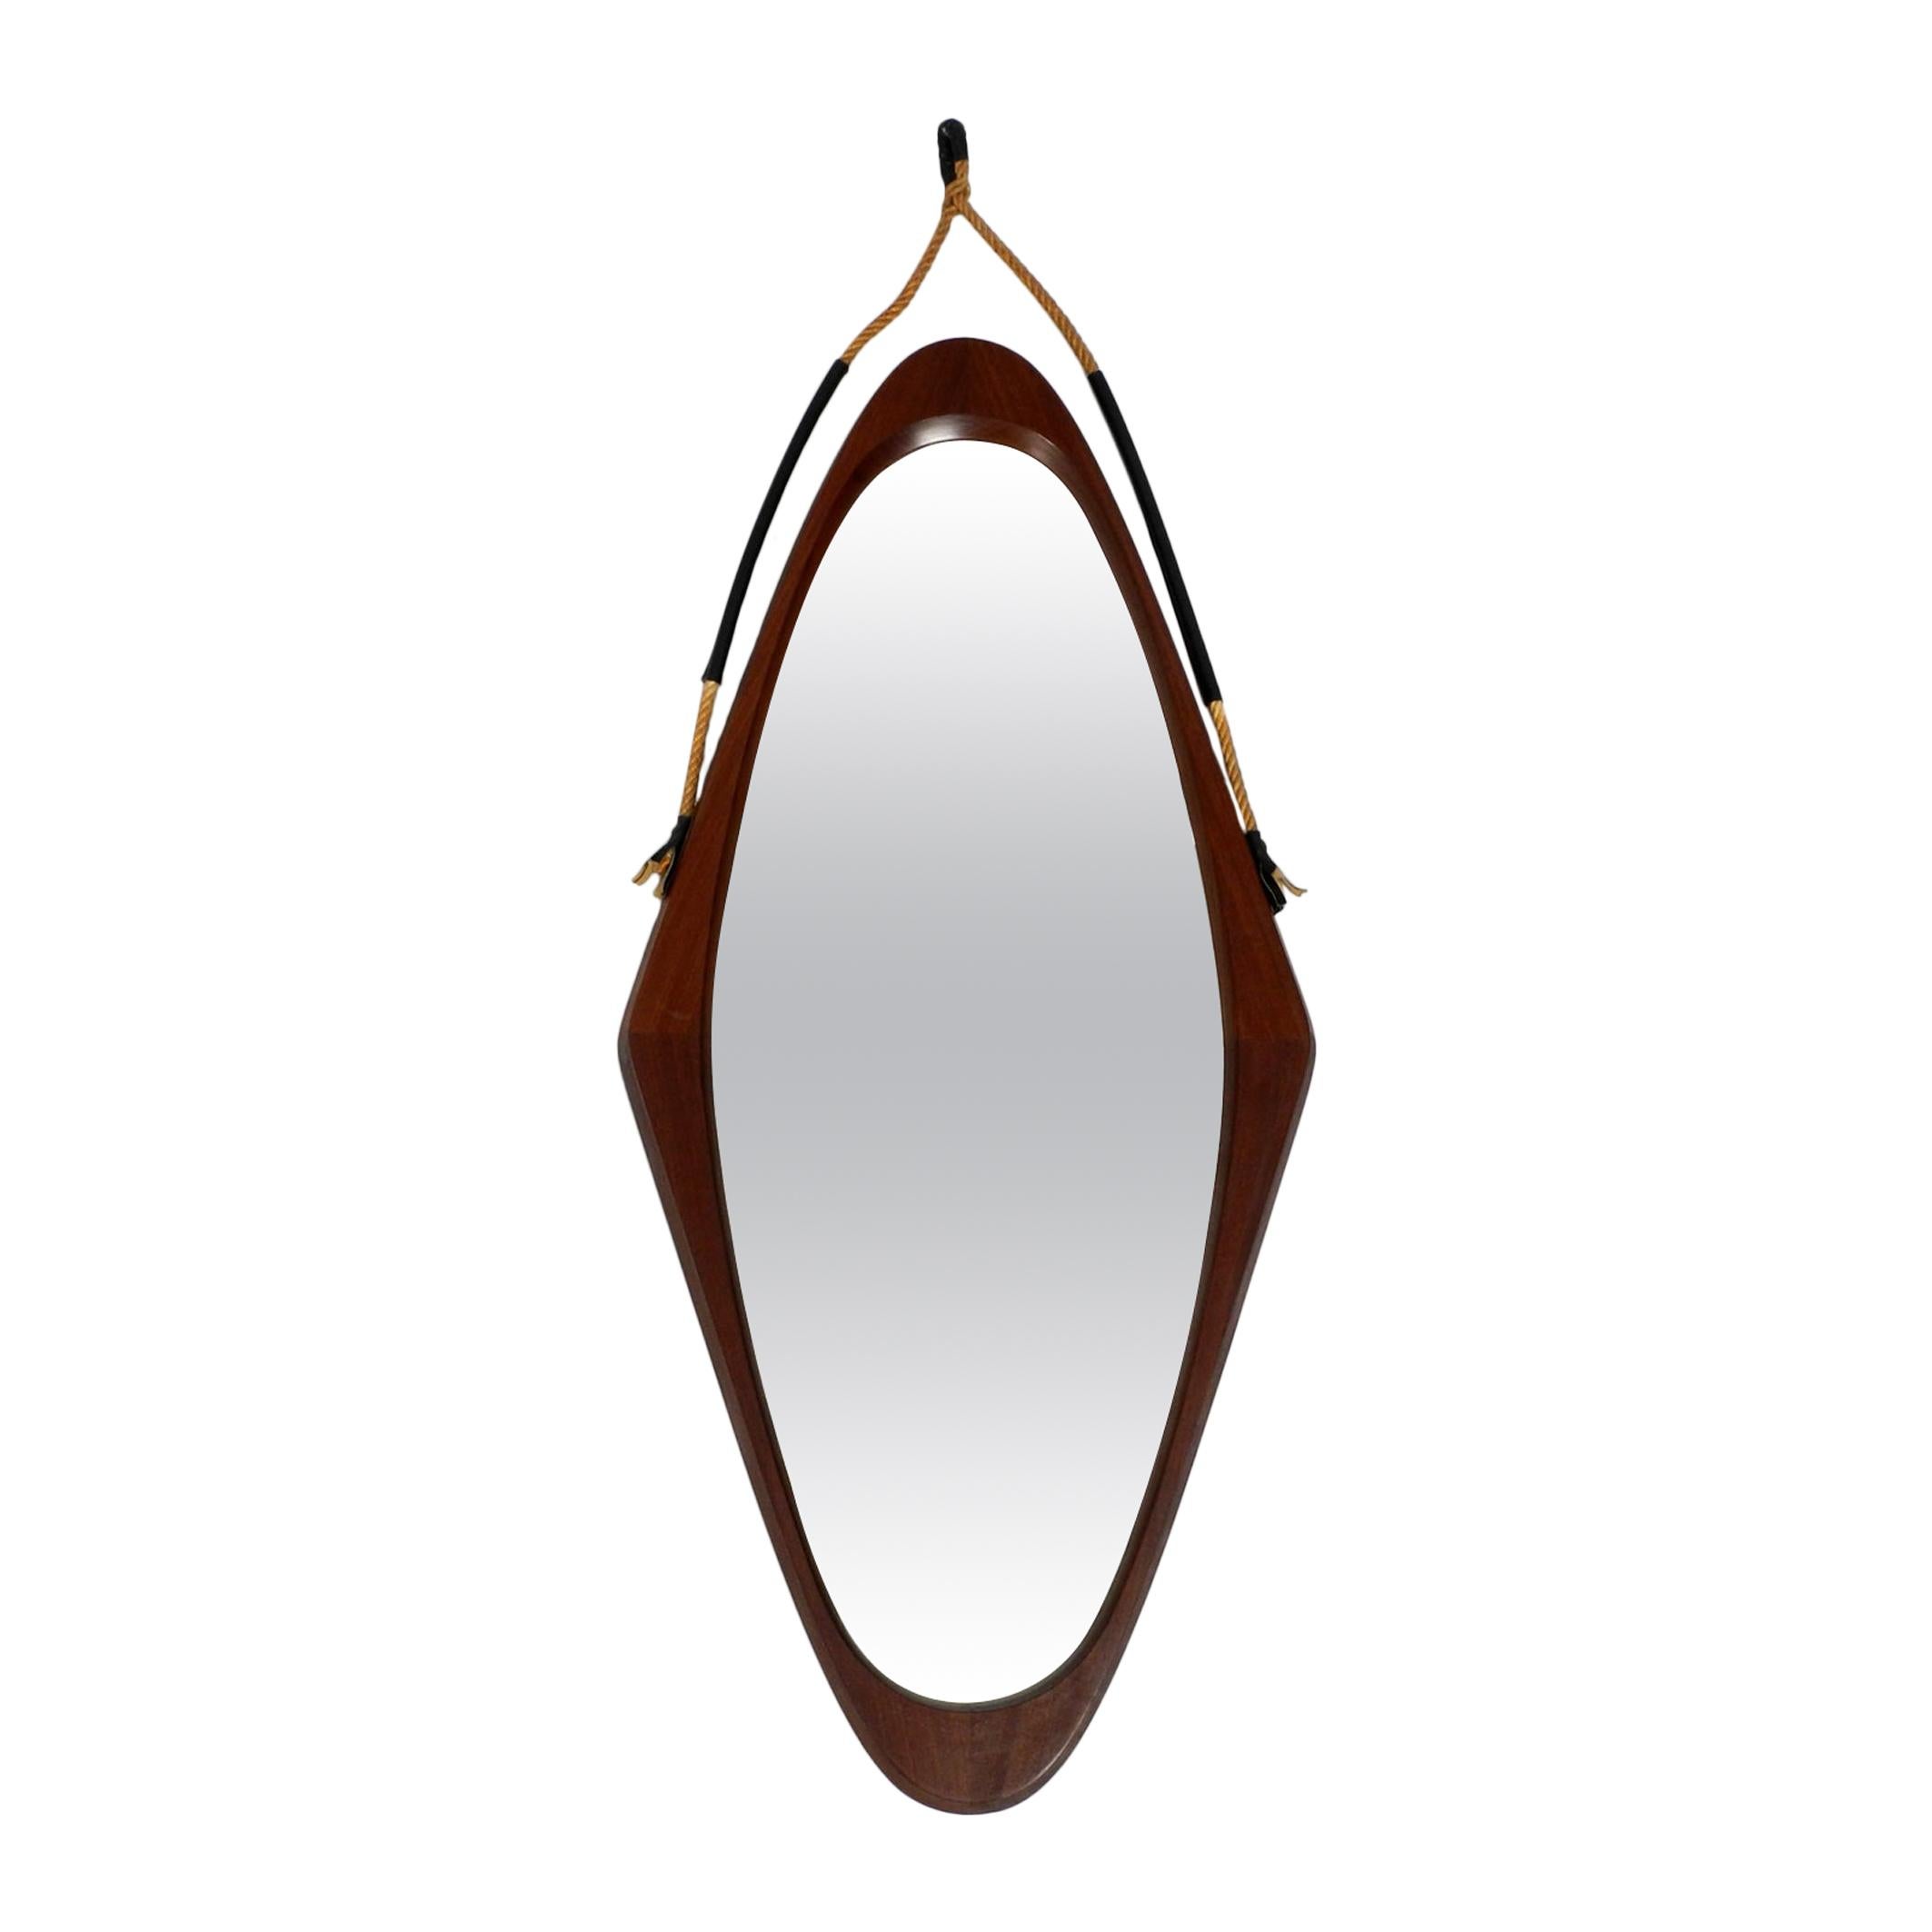 1960s Large Rhombus-Shaped Teak Wall Mirror with Thick Rope for Hanging